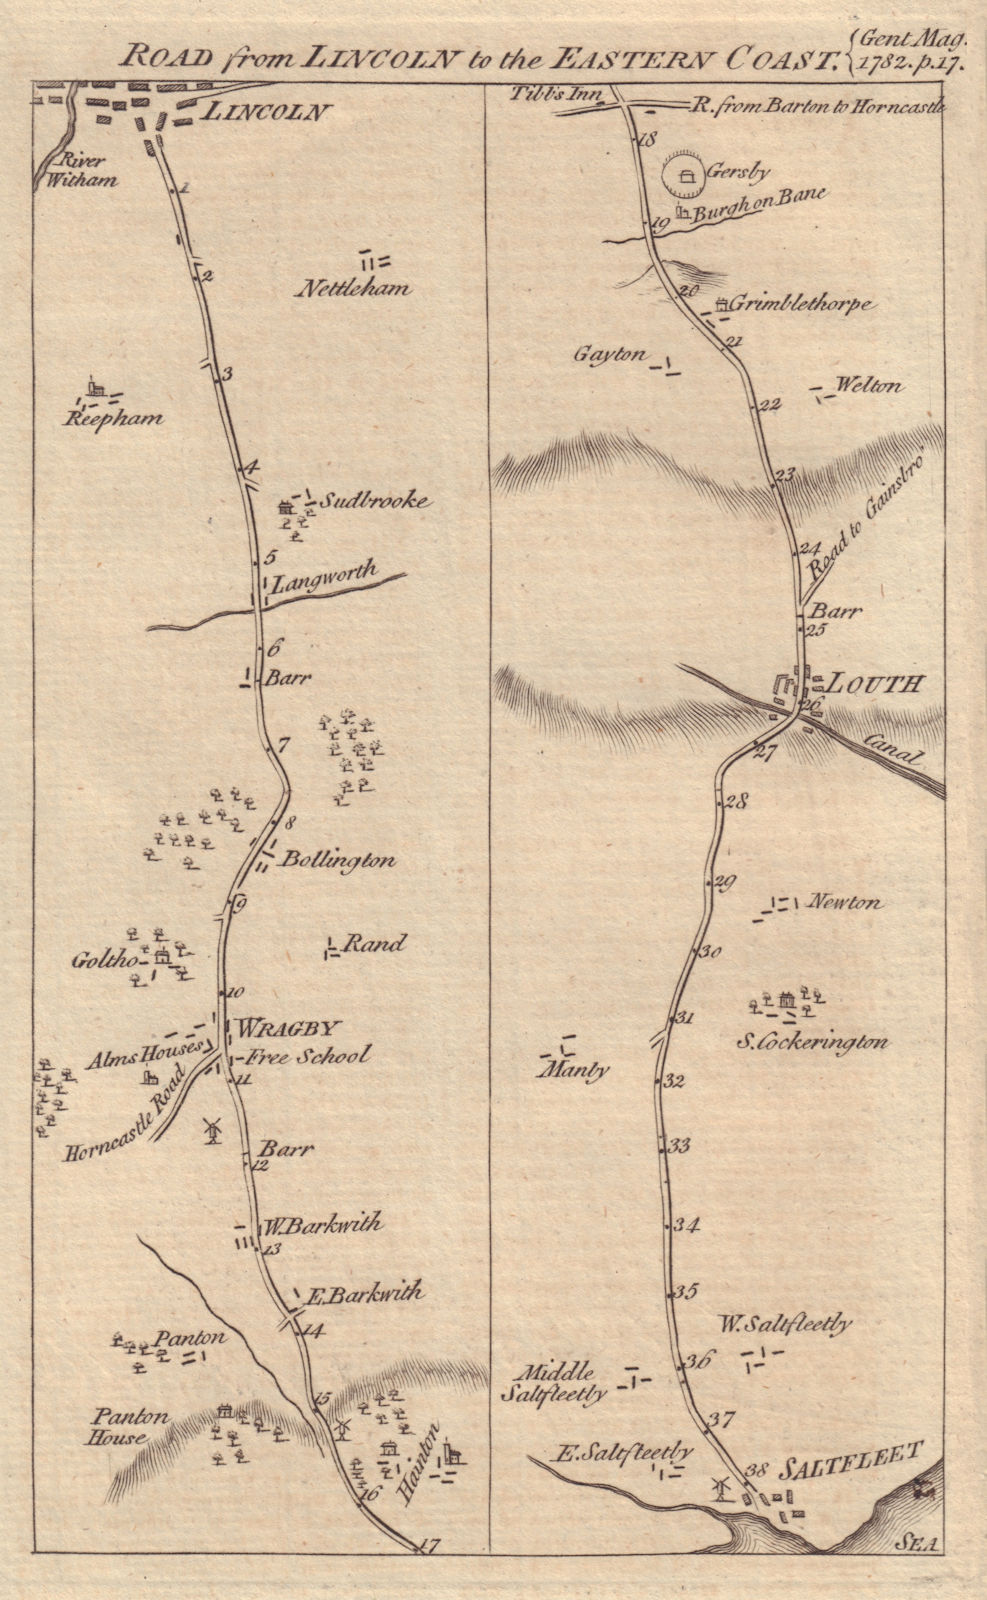 Associate Product Road from Lincoln-Wragby-Louth-Saltfleet strip map. GENTS MAG 1782 old